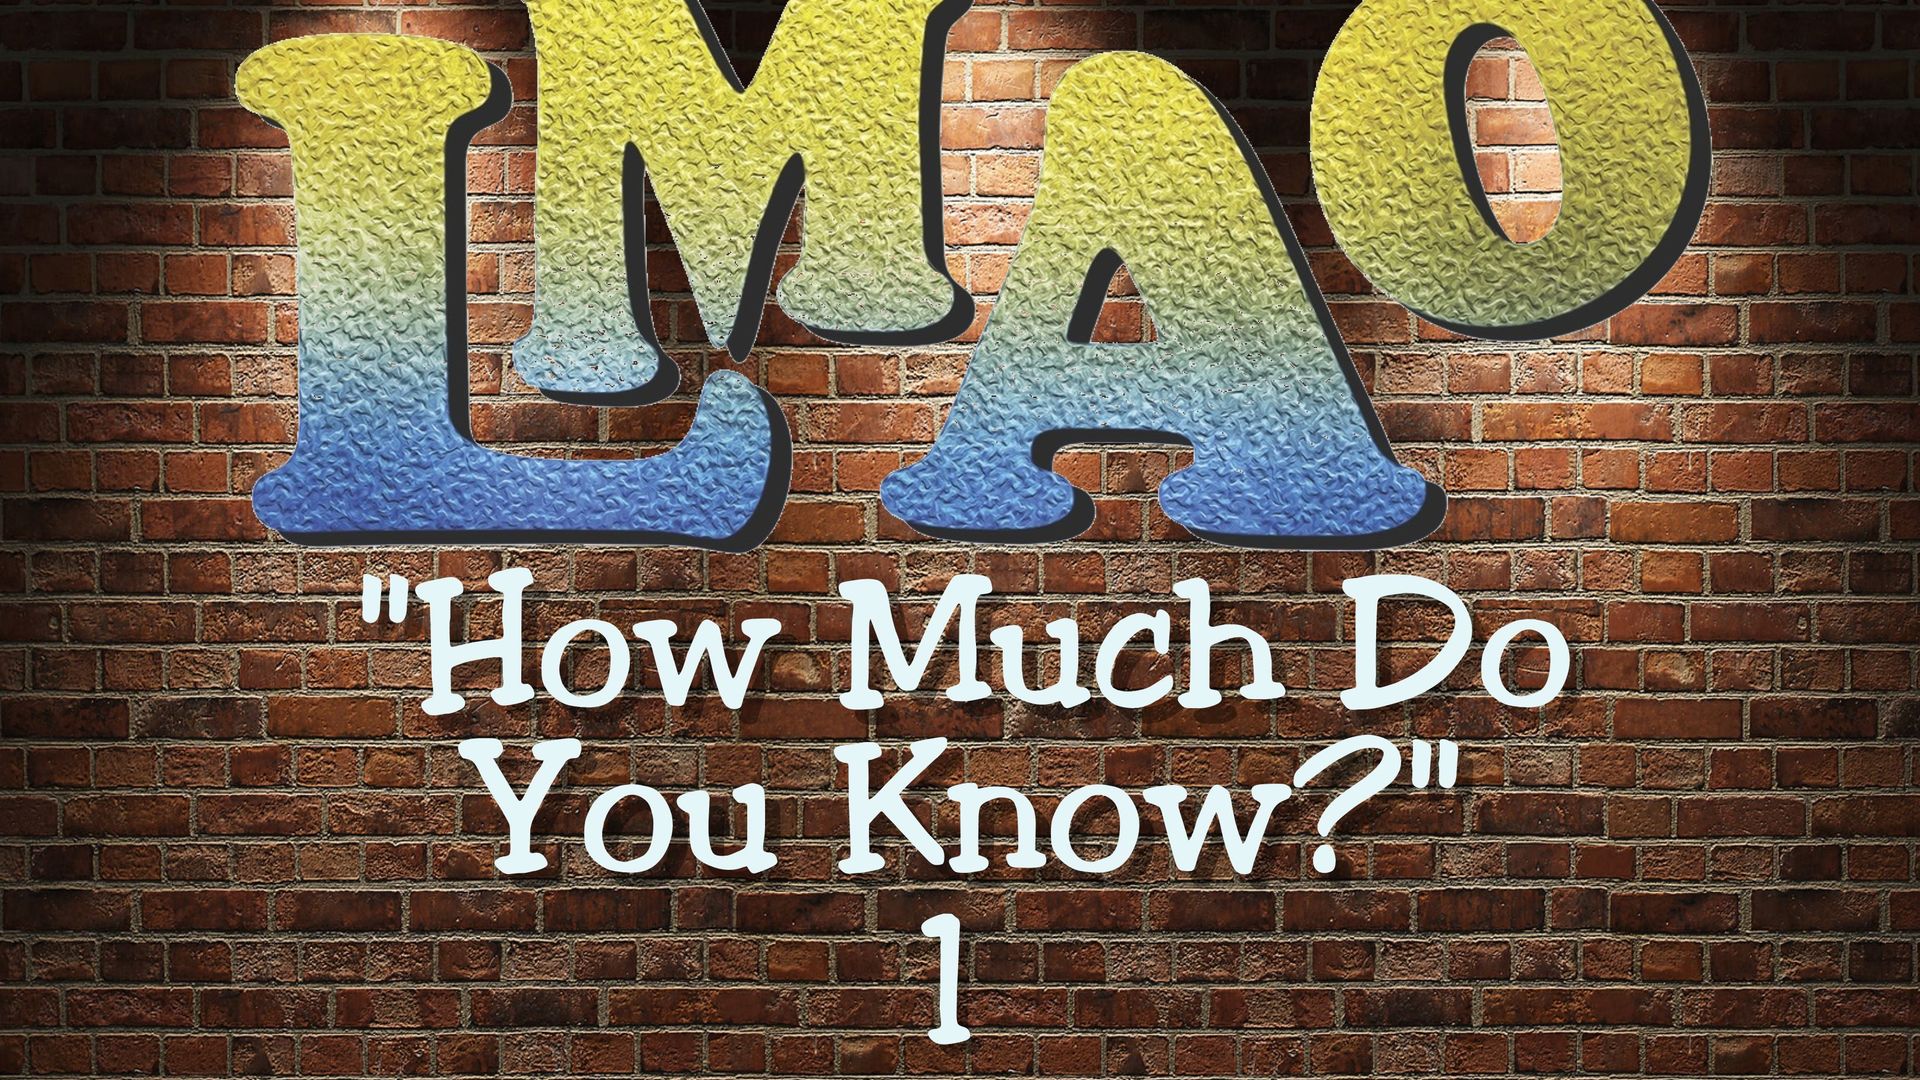 LMAO - How much do YOU know? Episode 1